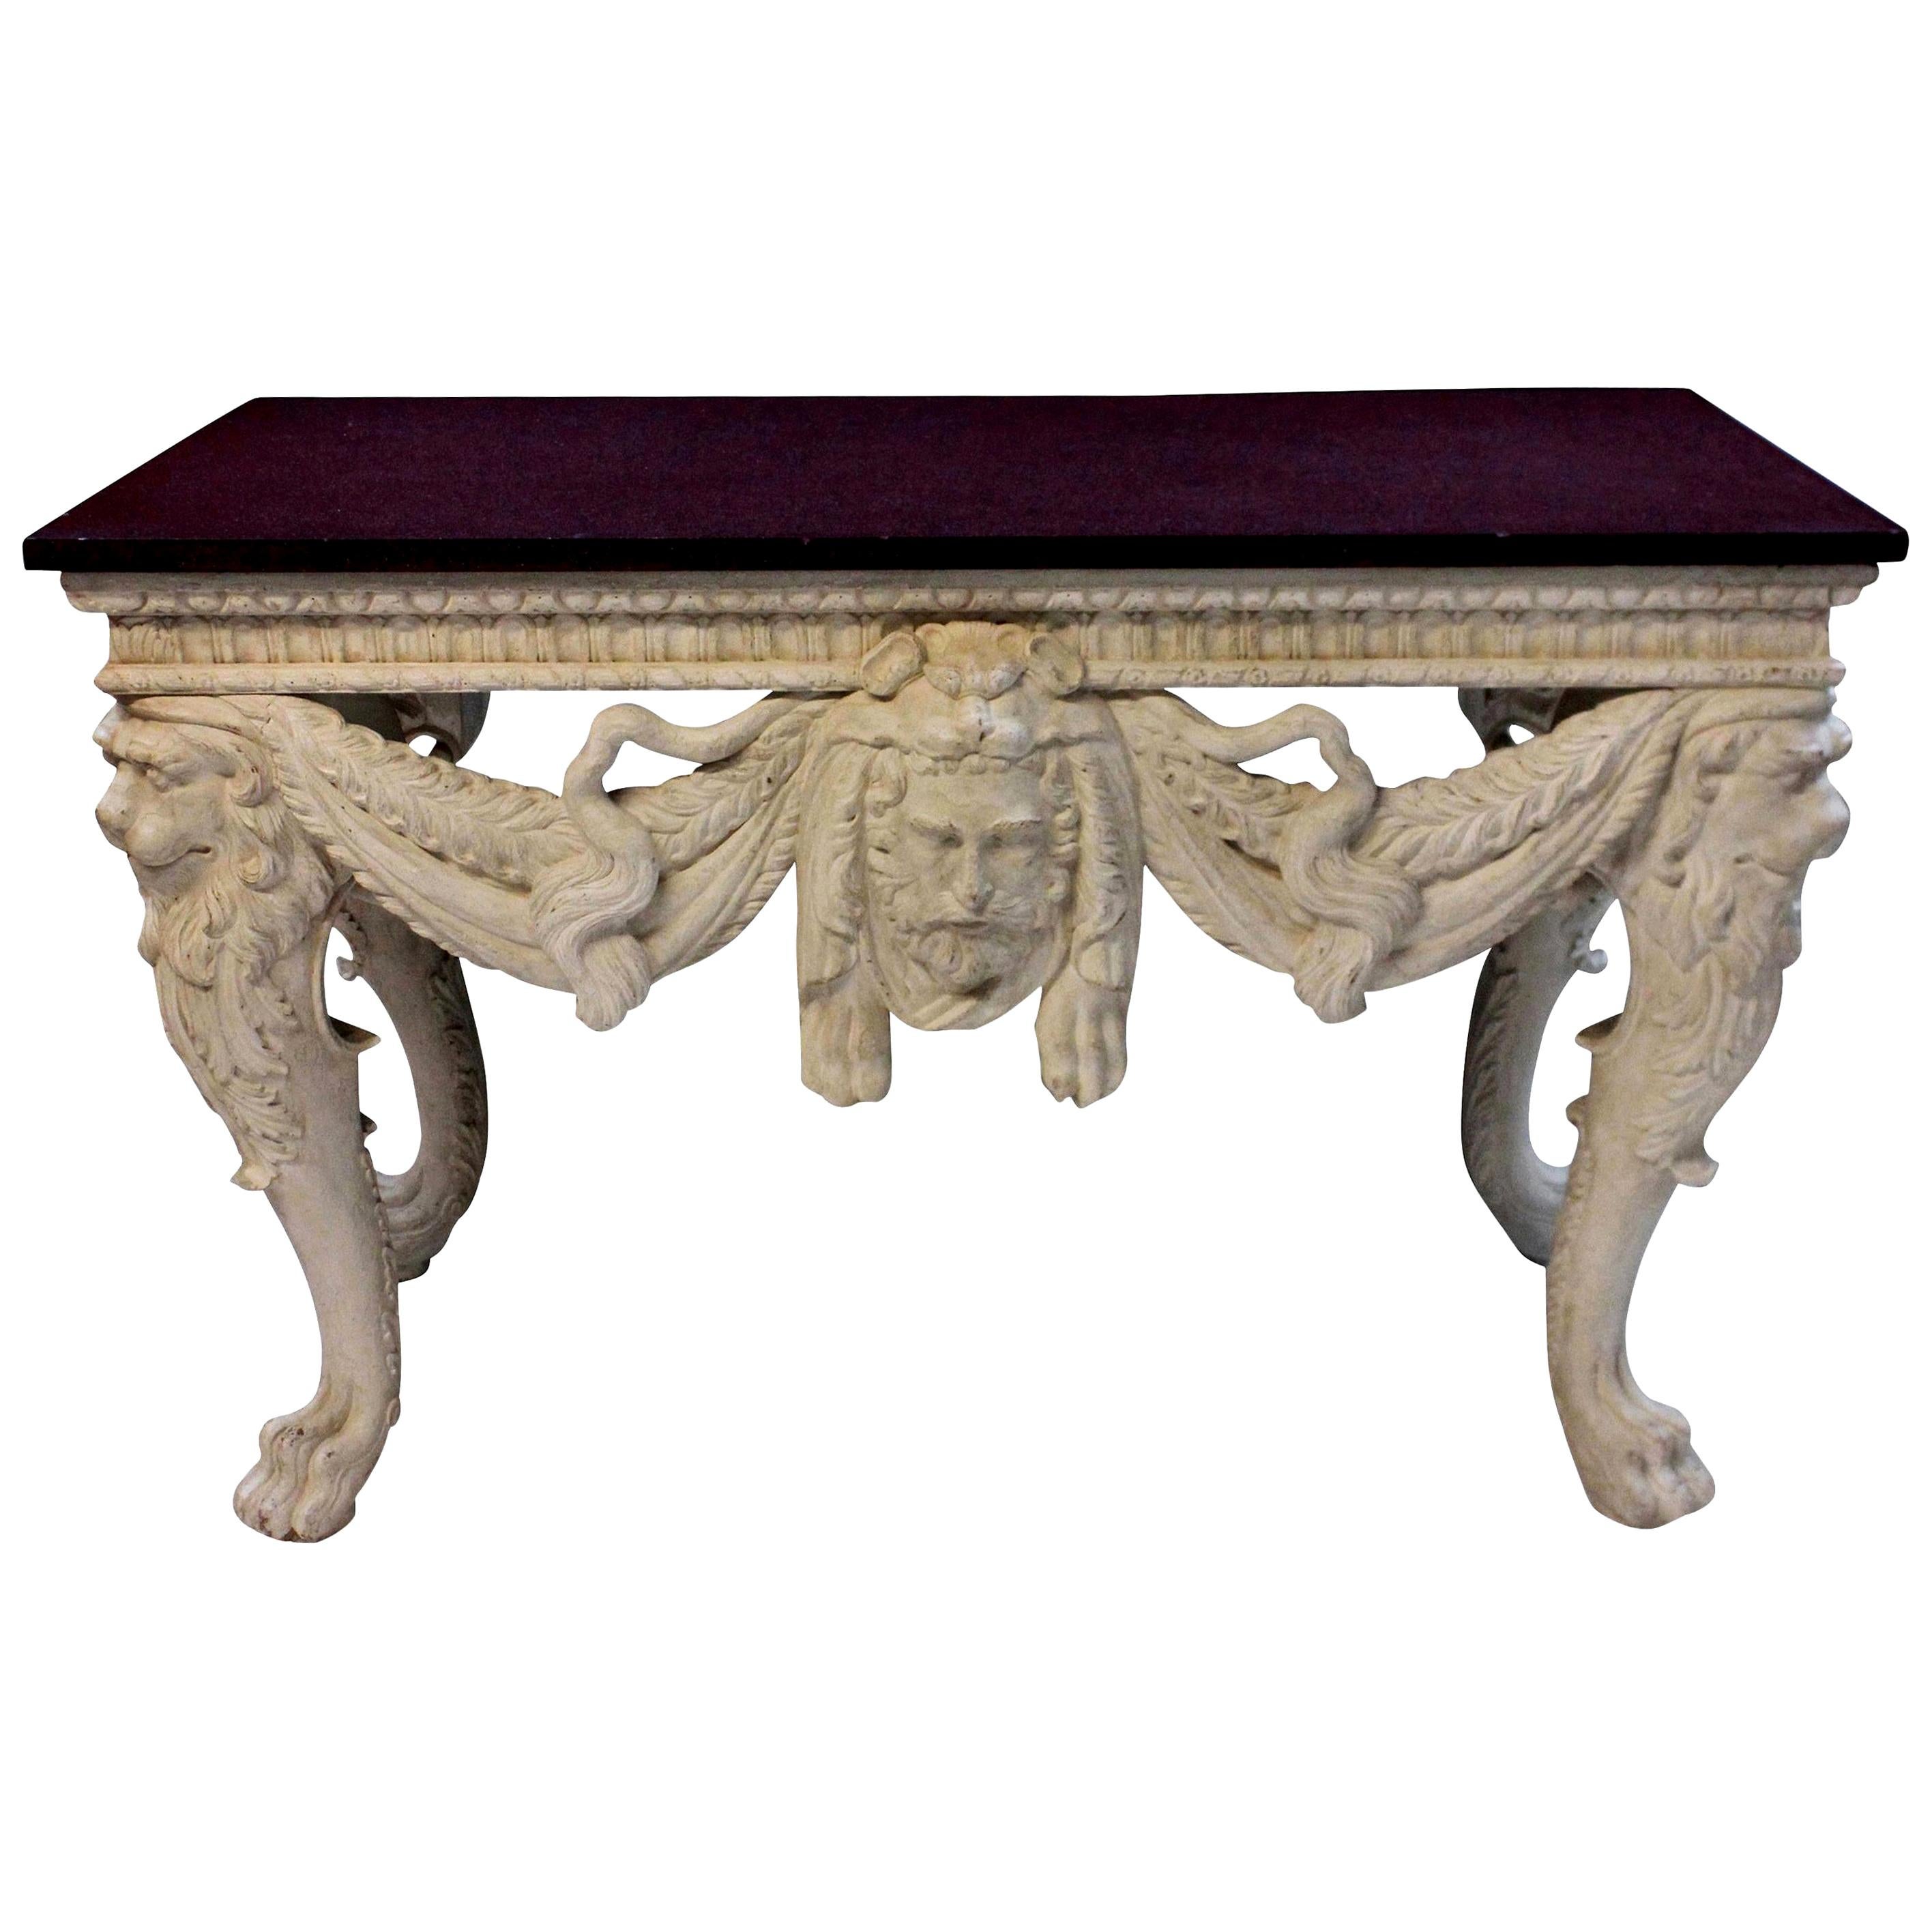 English County House Console Table with a Solid Porphyry Top